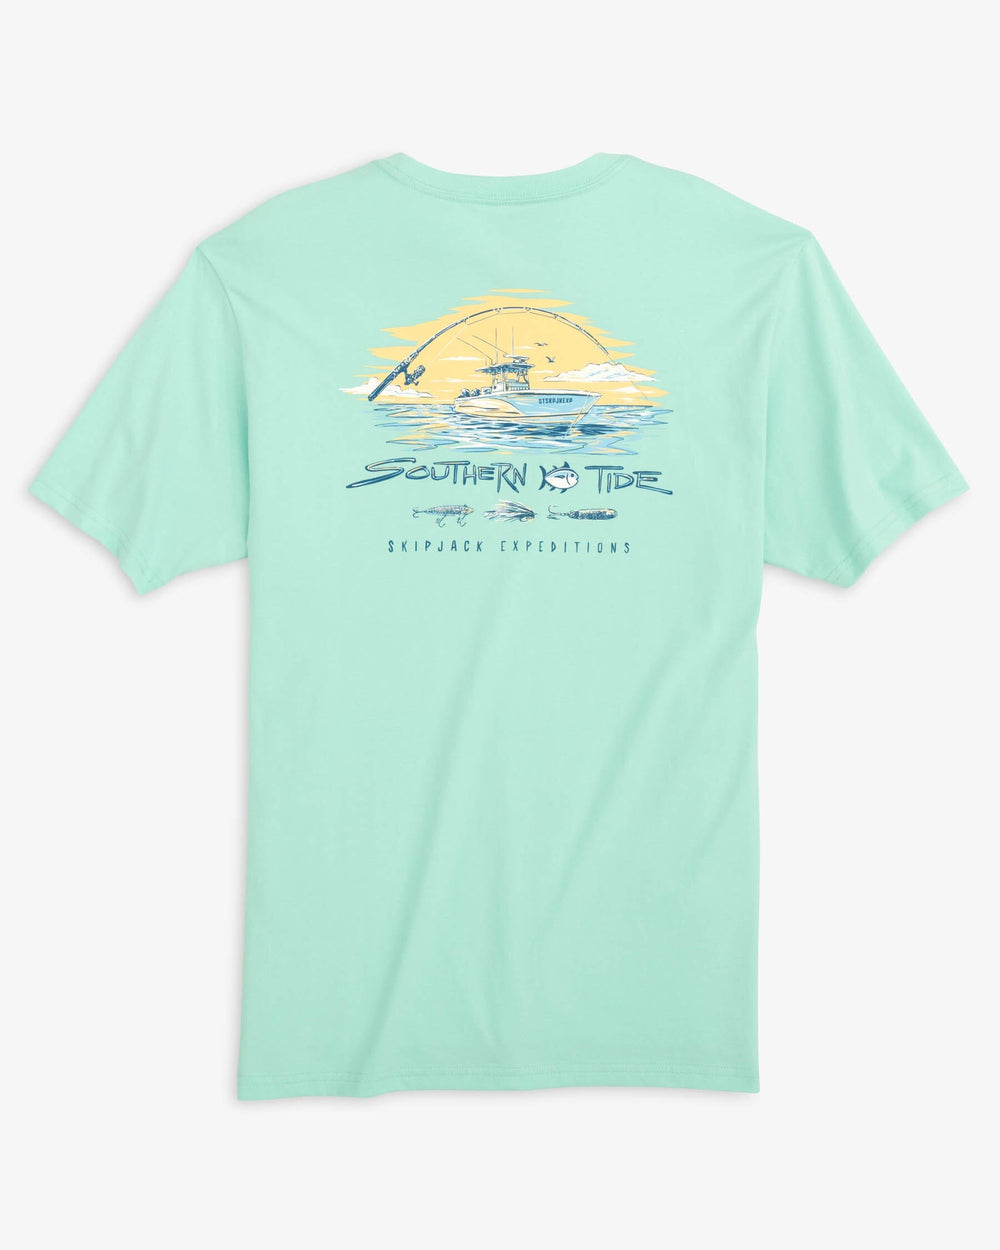 The back view of the Southern Tide Skipjack Expeditions T-Shirt by Southern Tide - Baltic Teal